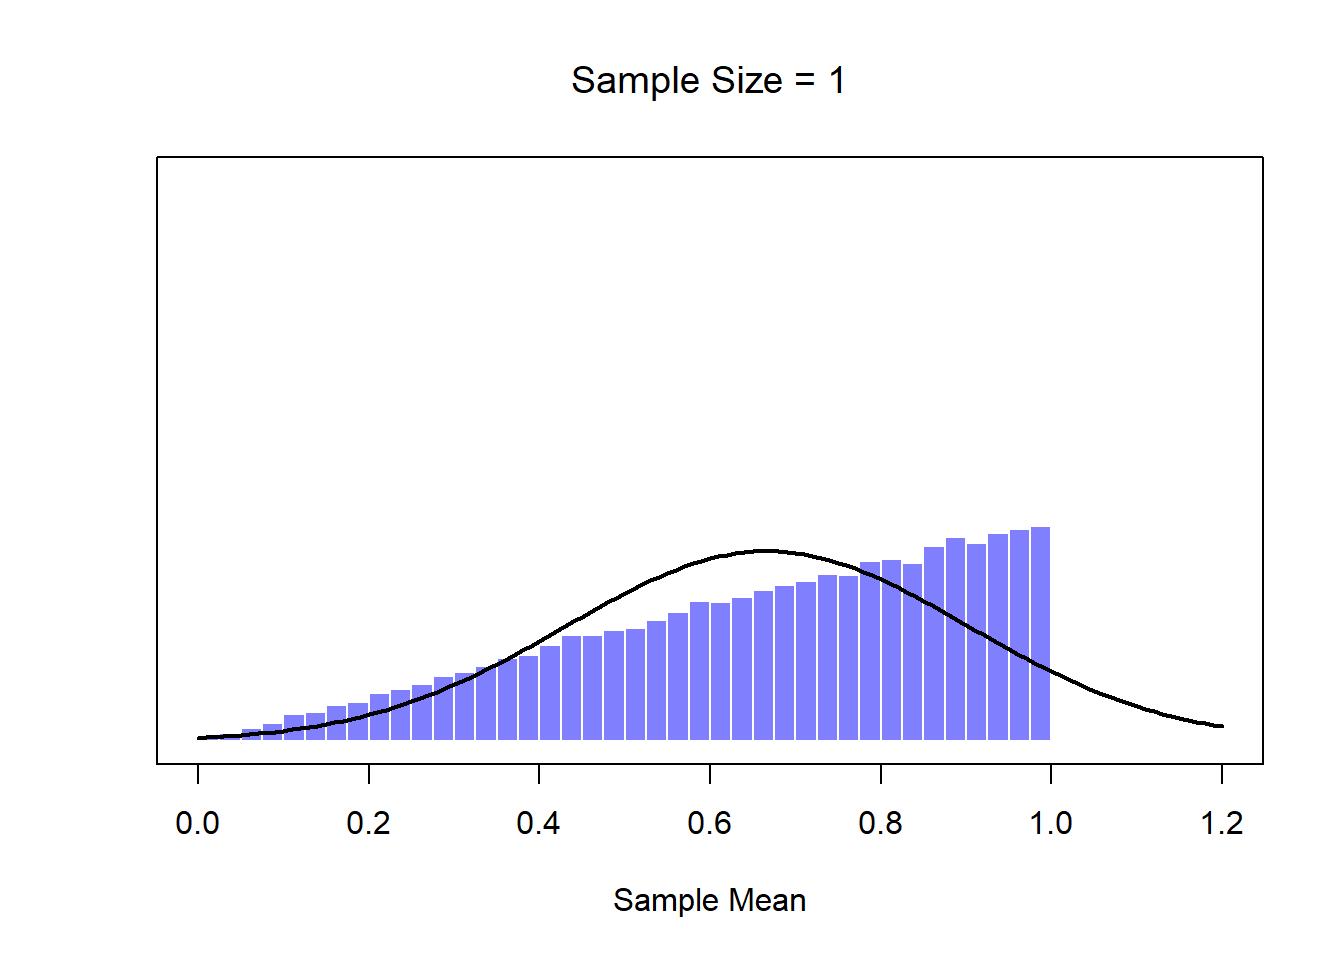 A demonstration of the central limit theorem. In panel a, we have a non-normal population distribution; and panels b-d show the sampling distribution of the mean for samples of size 2,4 and 8, for data drawn from the distribution in panel a. As you can see, even though the original population distribution is non-normal, the sampling distribution of the mean becomes pretty close to normal by the time you have a sample of even 4 observations. 